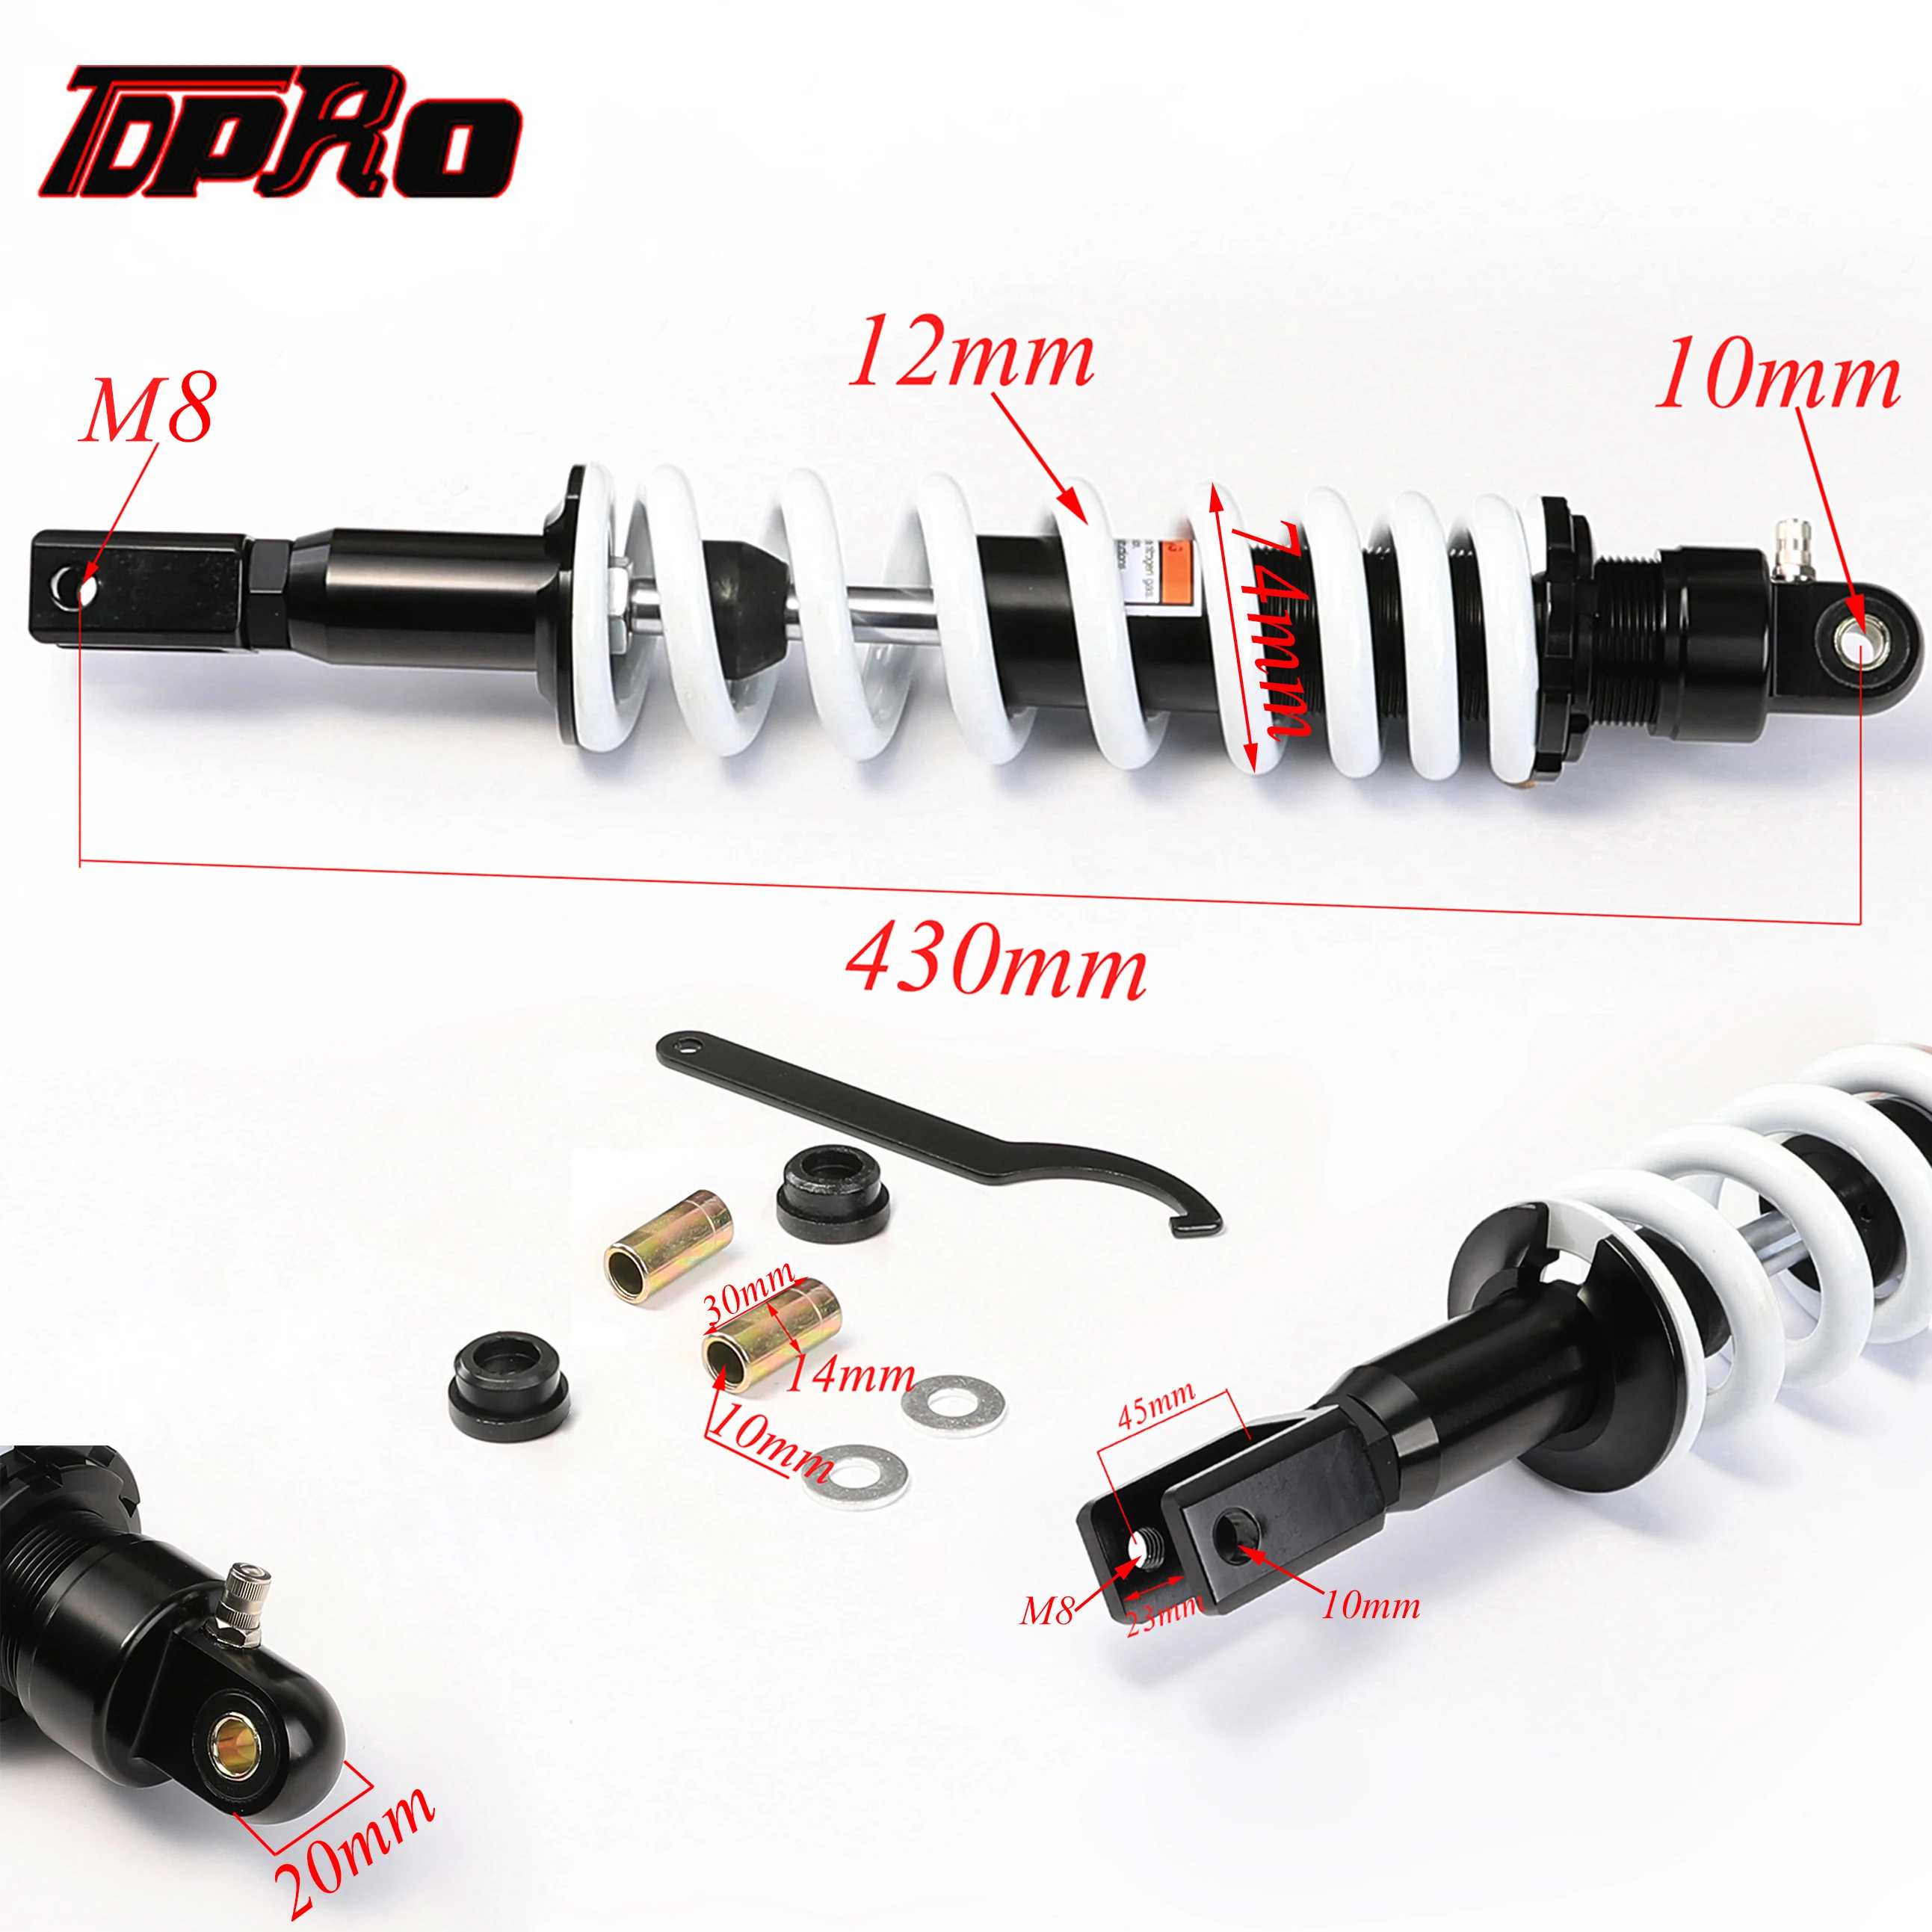 430MM 17'' Motorcycle Scooter Rear Shock Absorber Ajustable Suspension For Honda